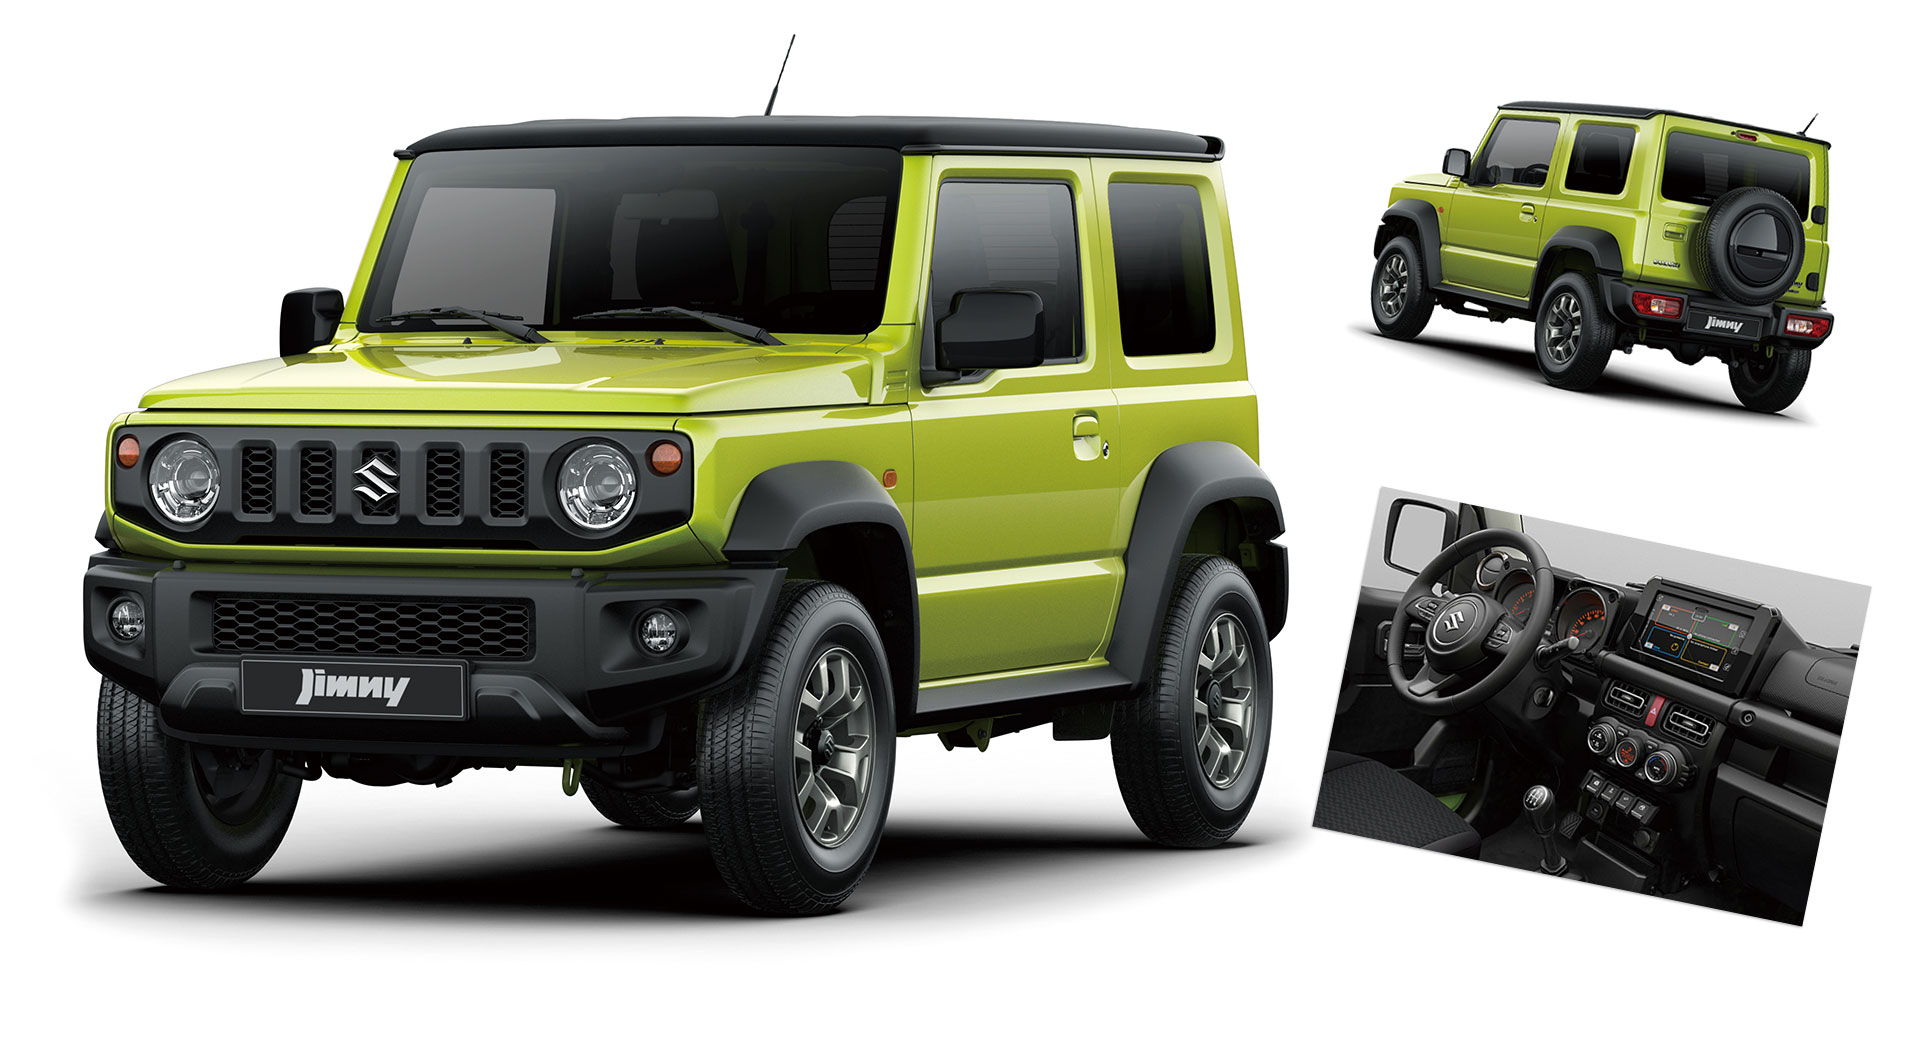 2019 Suzuki Jimny: First Official Images And Details